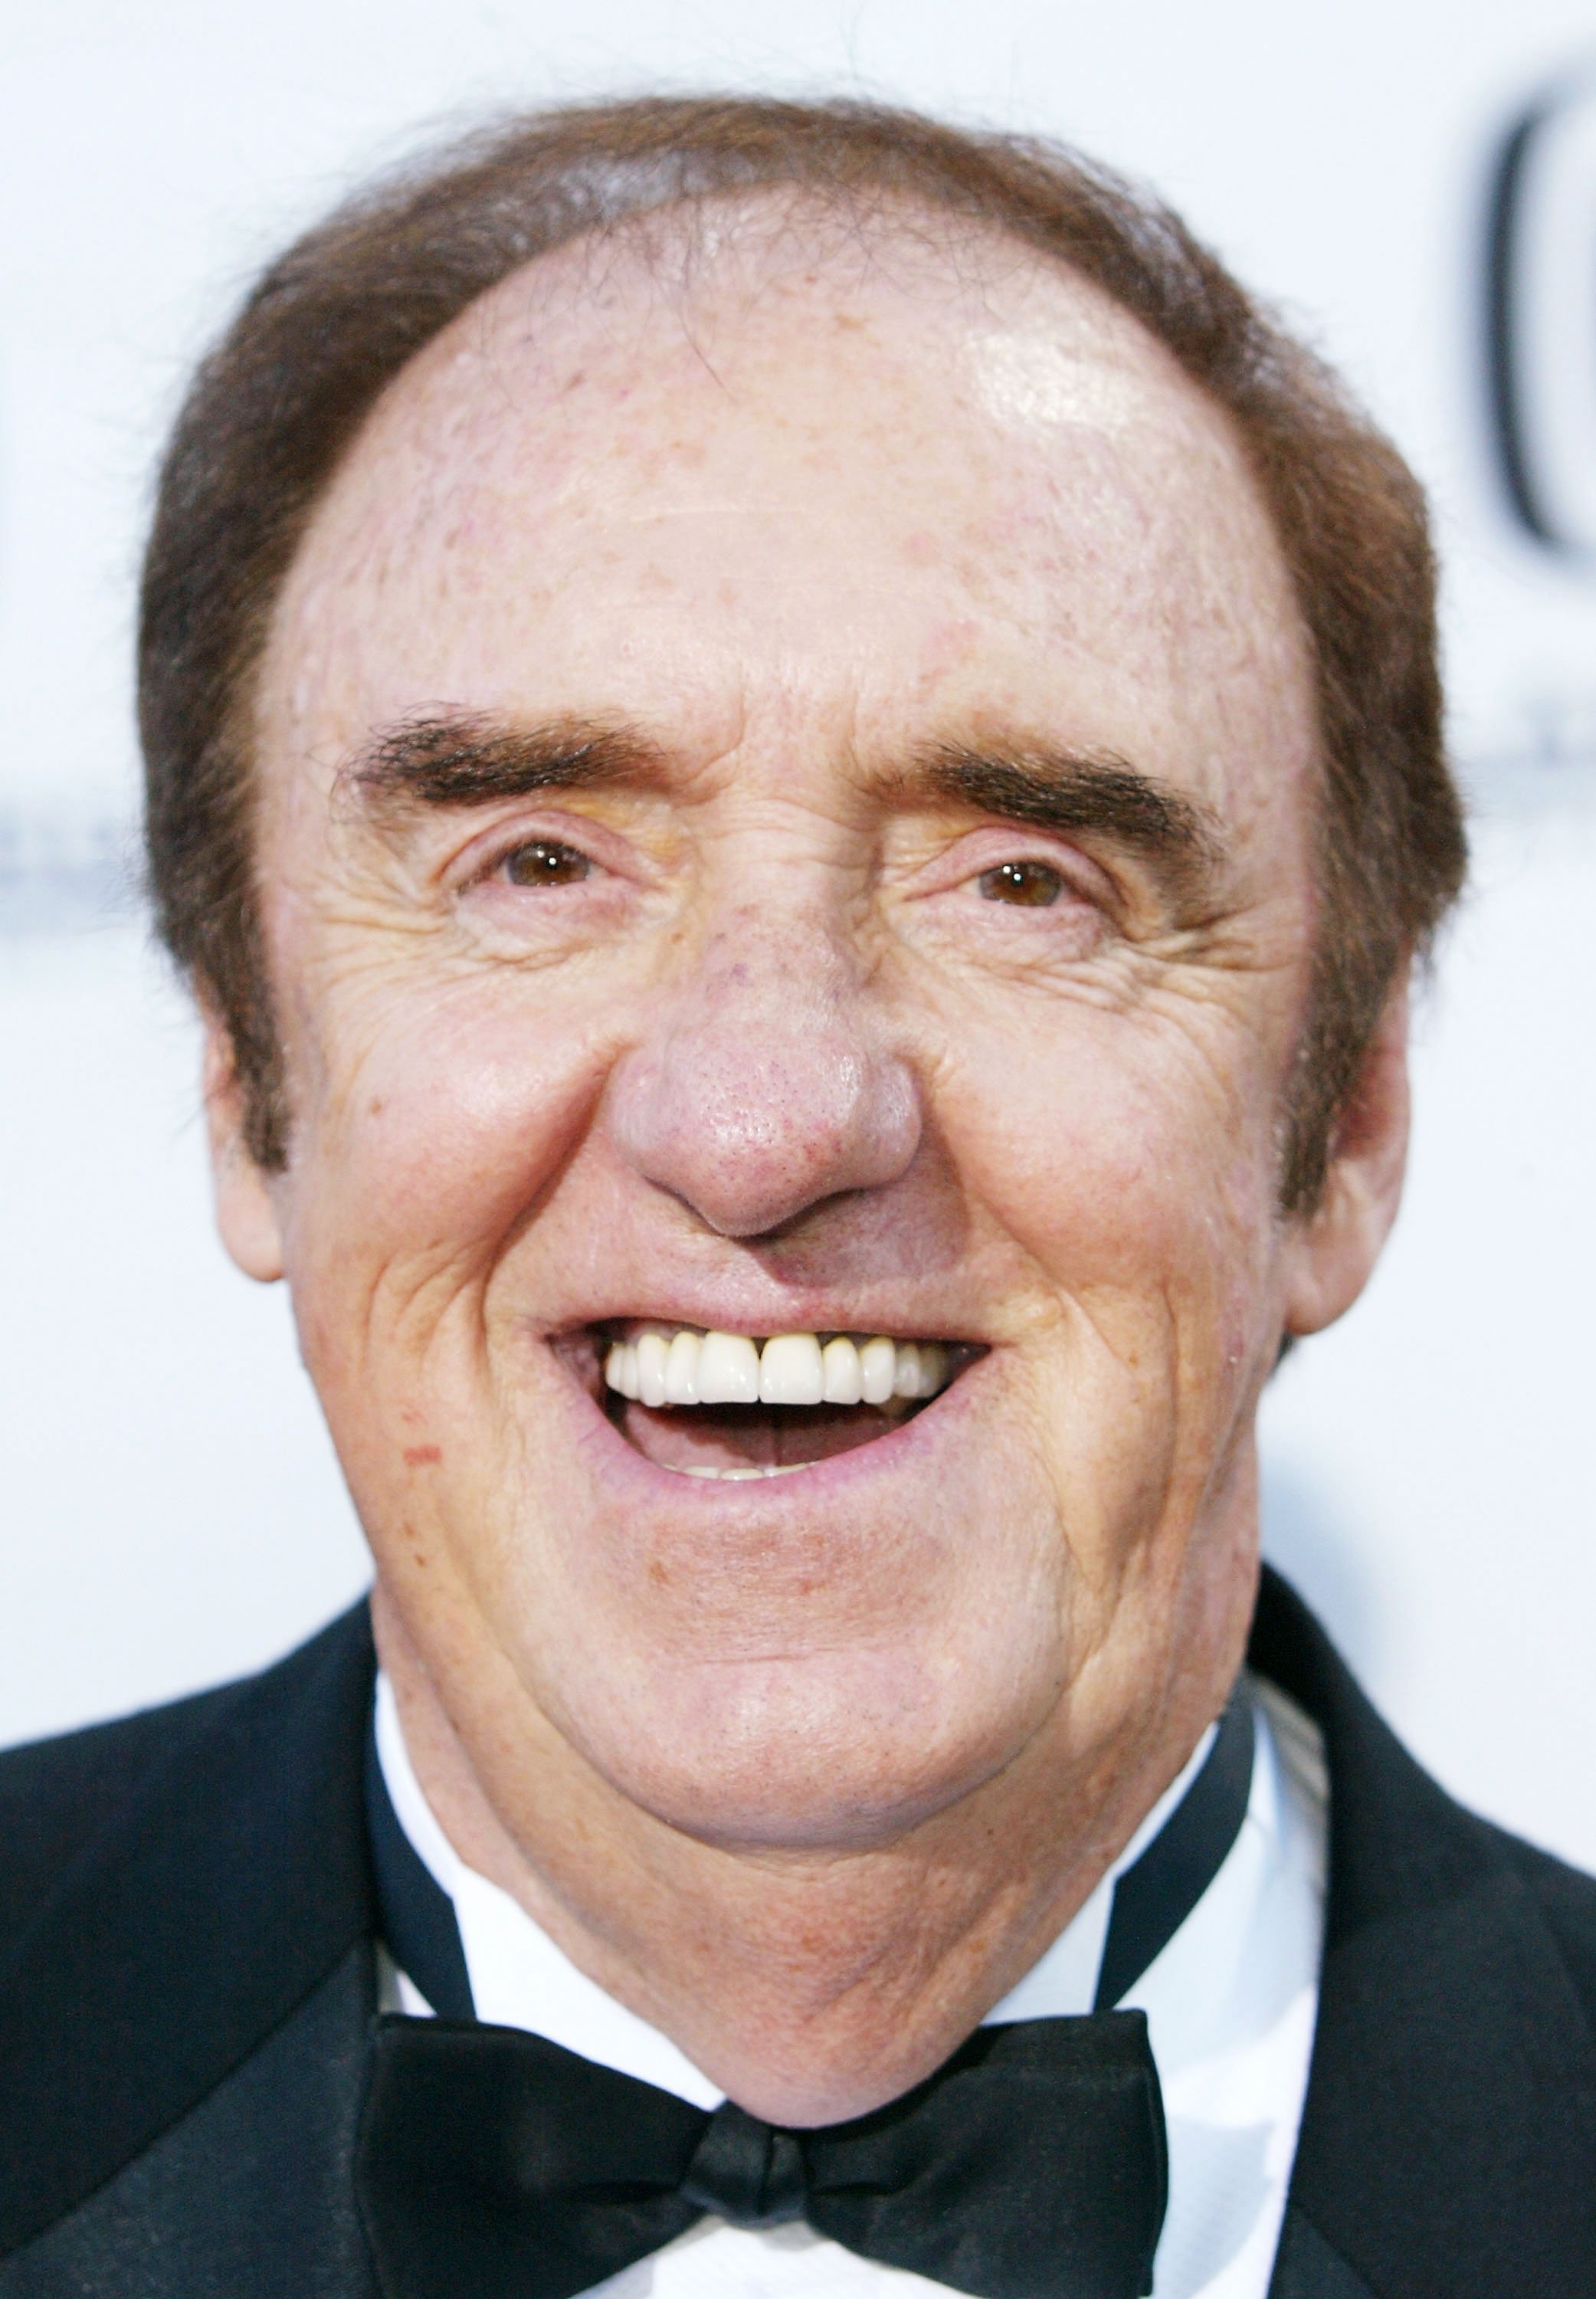 Jim Nabors attending the 2nd Annual TV Land Awards at The Hollywood Palladium on March 7, 2004 in Hollywood, California. | Source: Getty Images